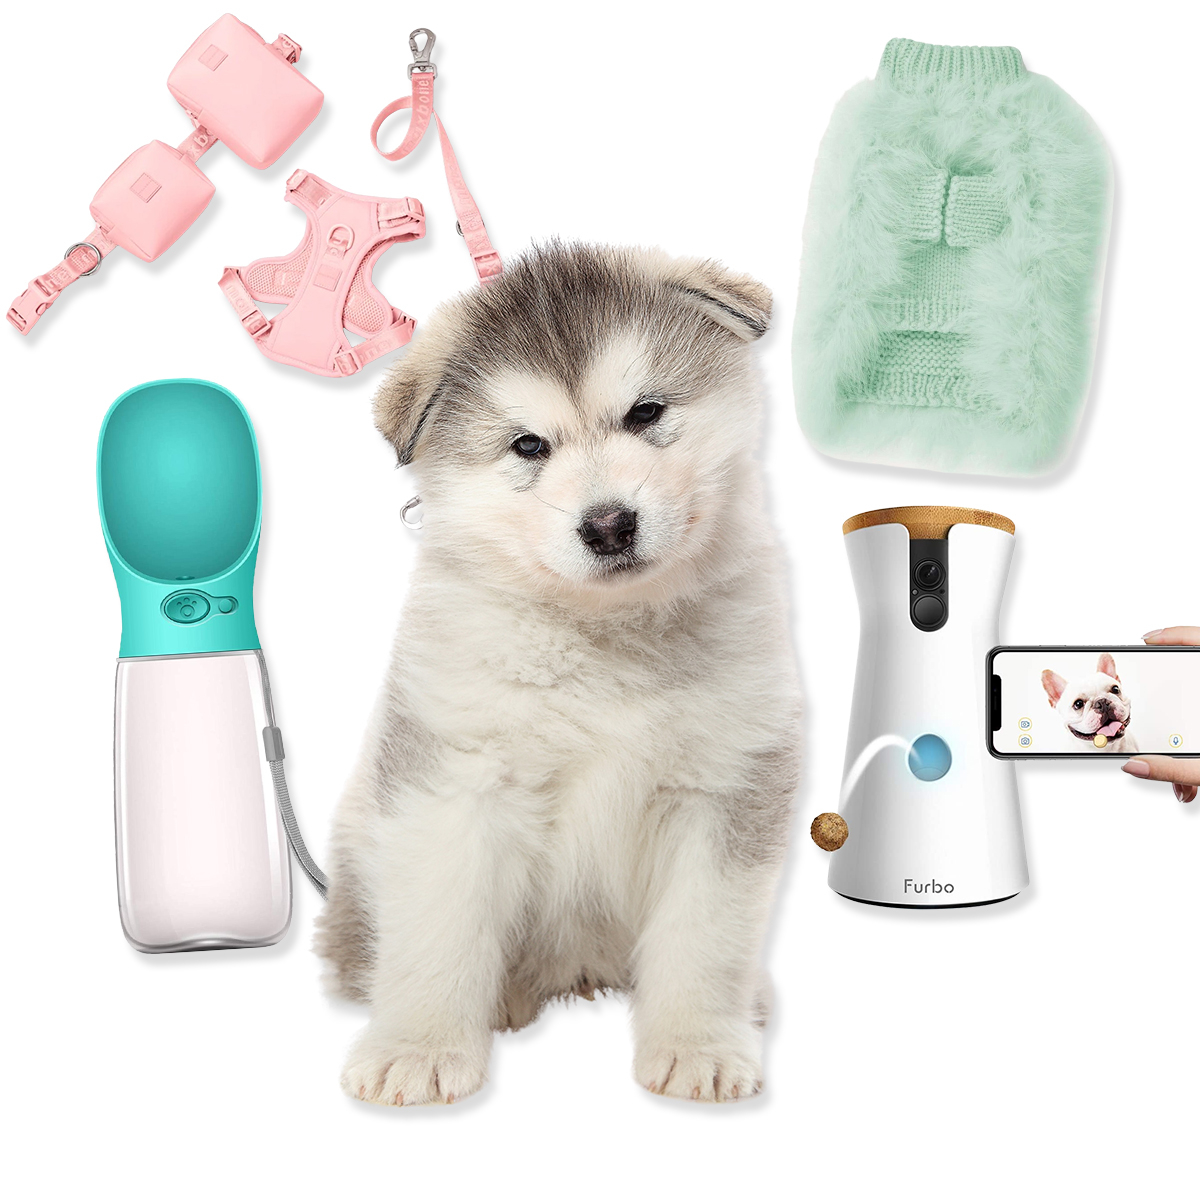 Gifts For Dogs: 16 Presents Perfect For Any Occasion - DodoWell